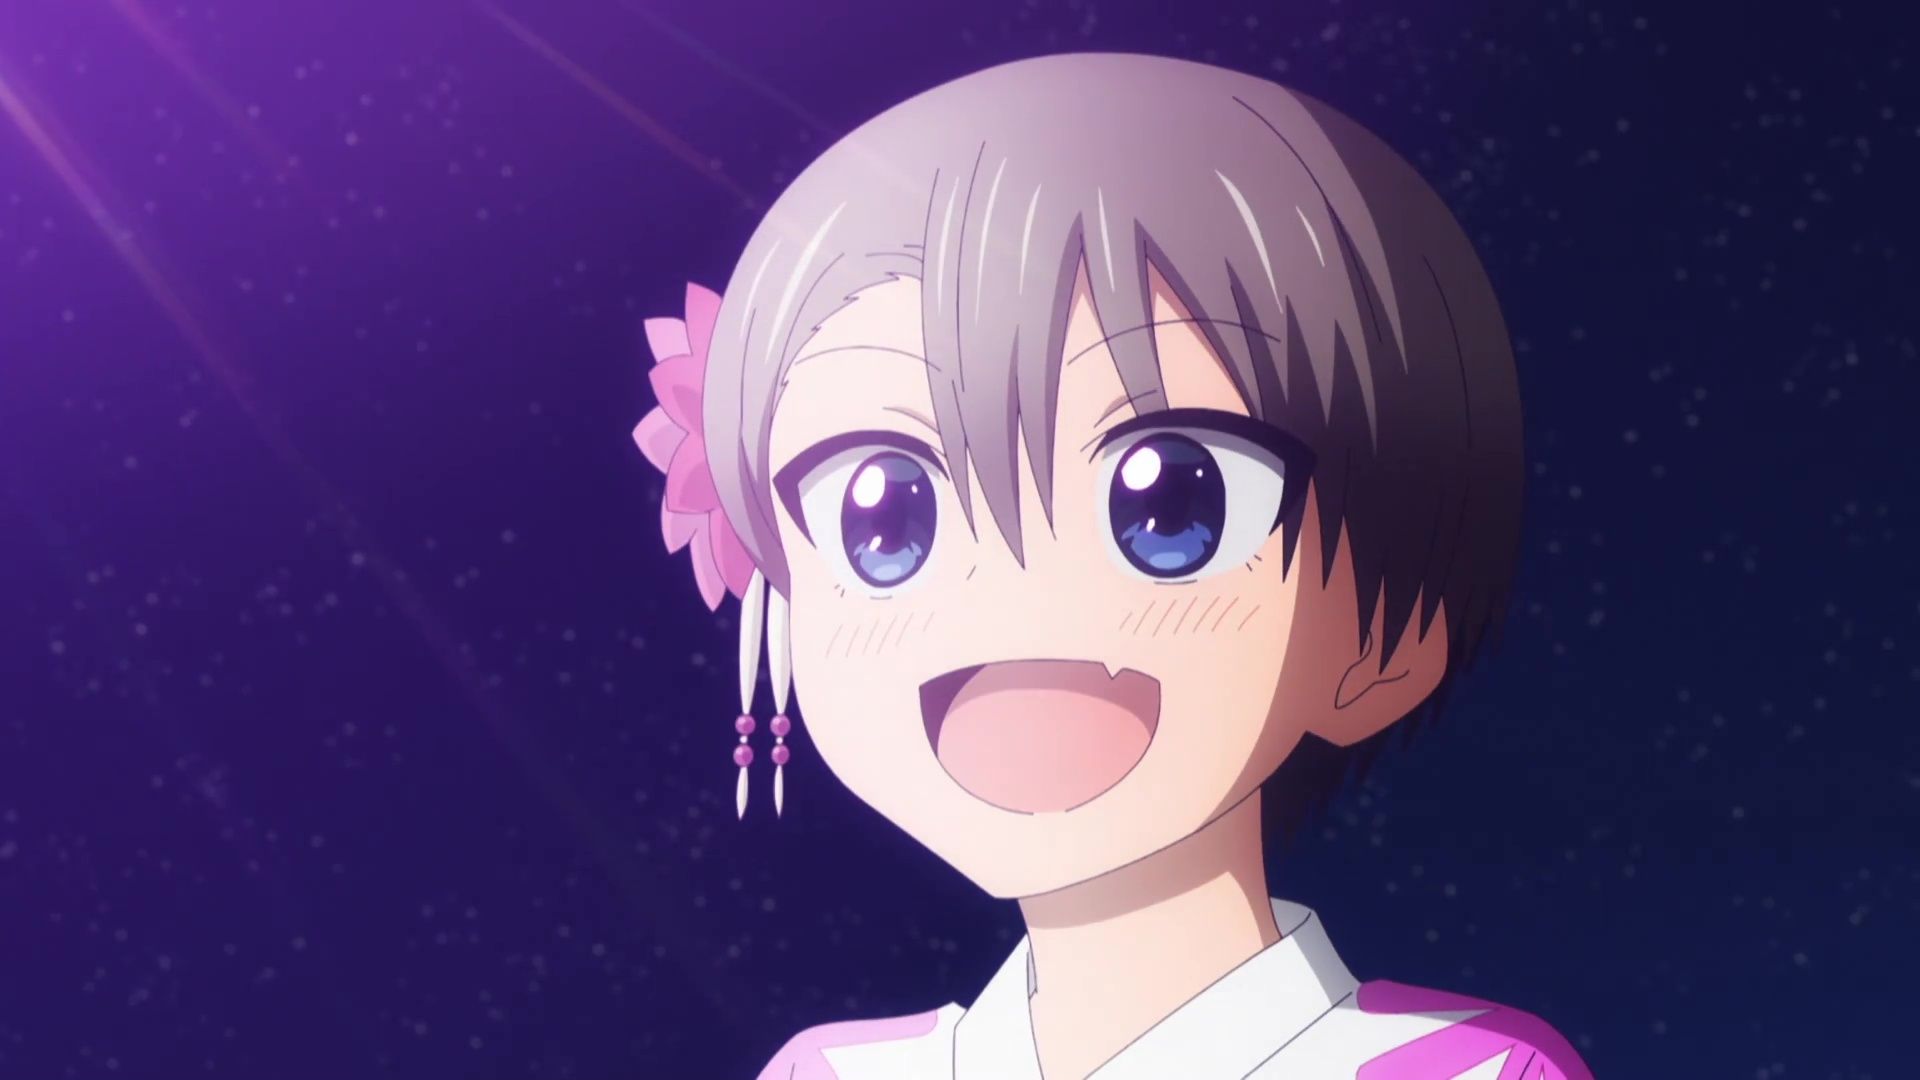 Uzaki Chan Wants To Hang Out Episode 9 Release Date, Synopsis, And Preview